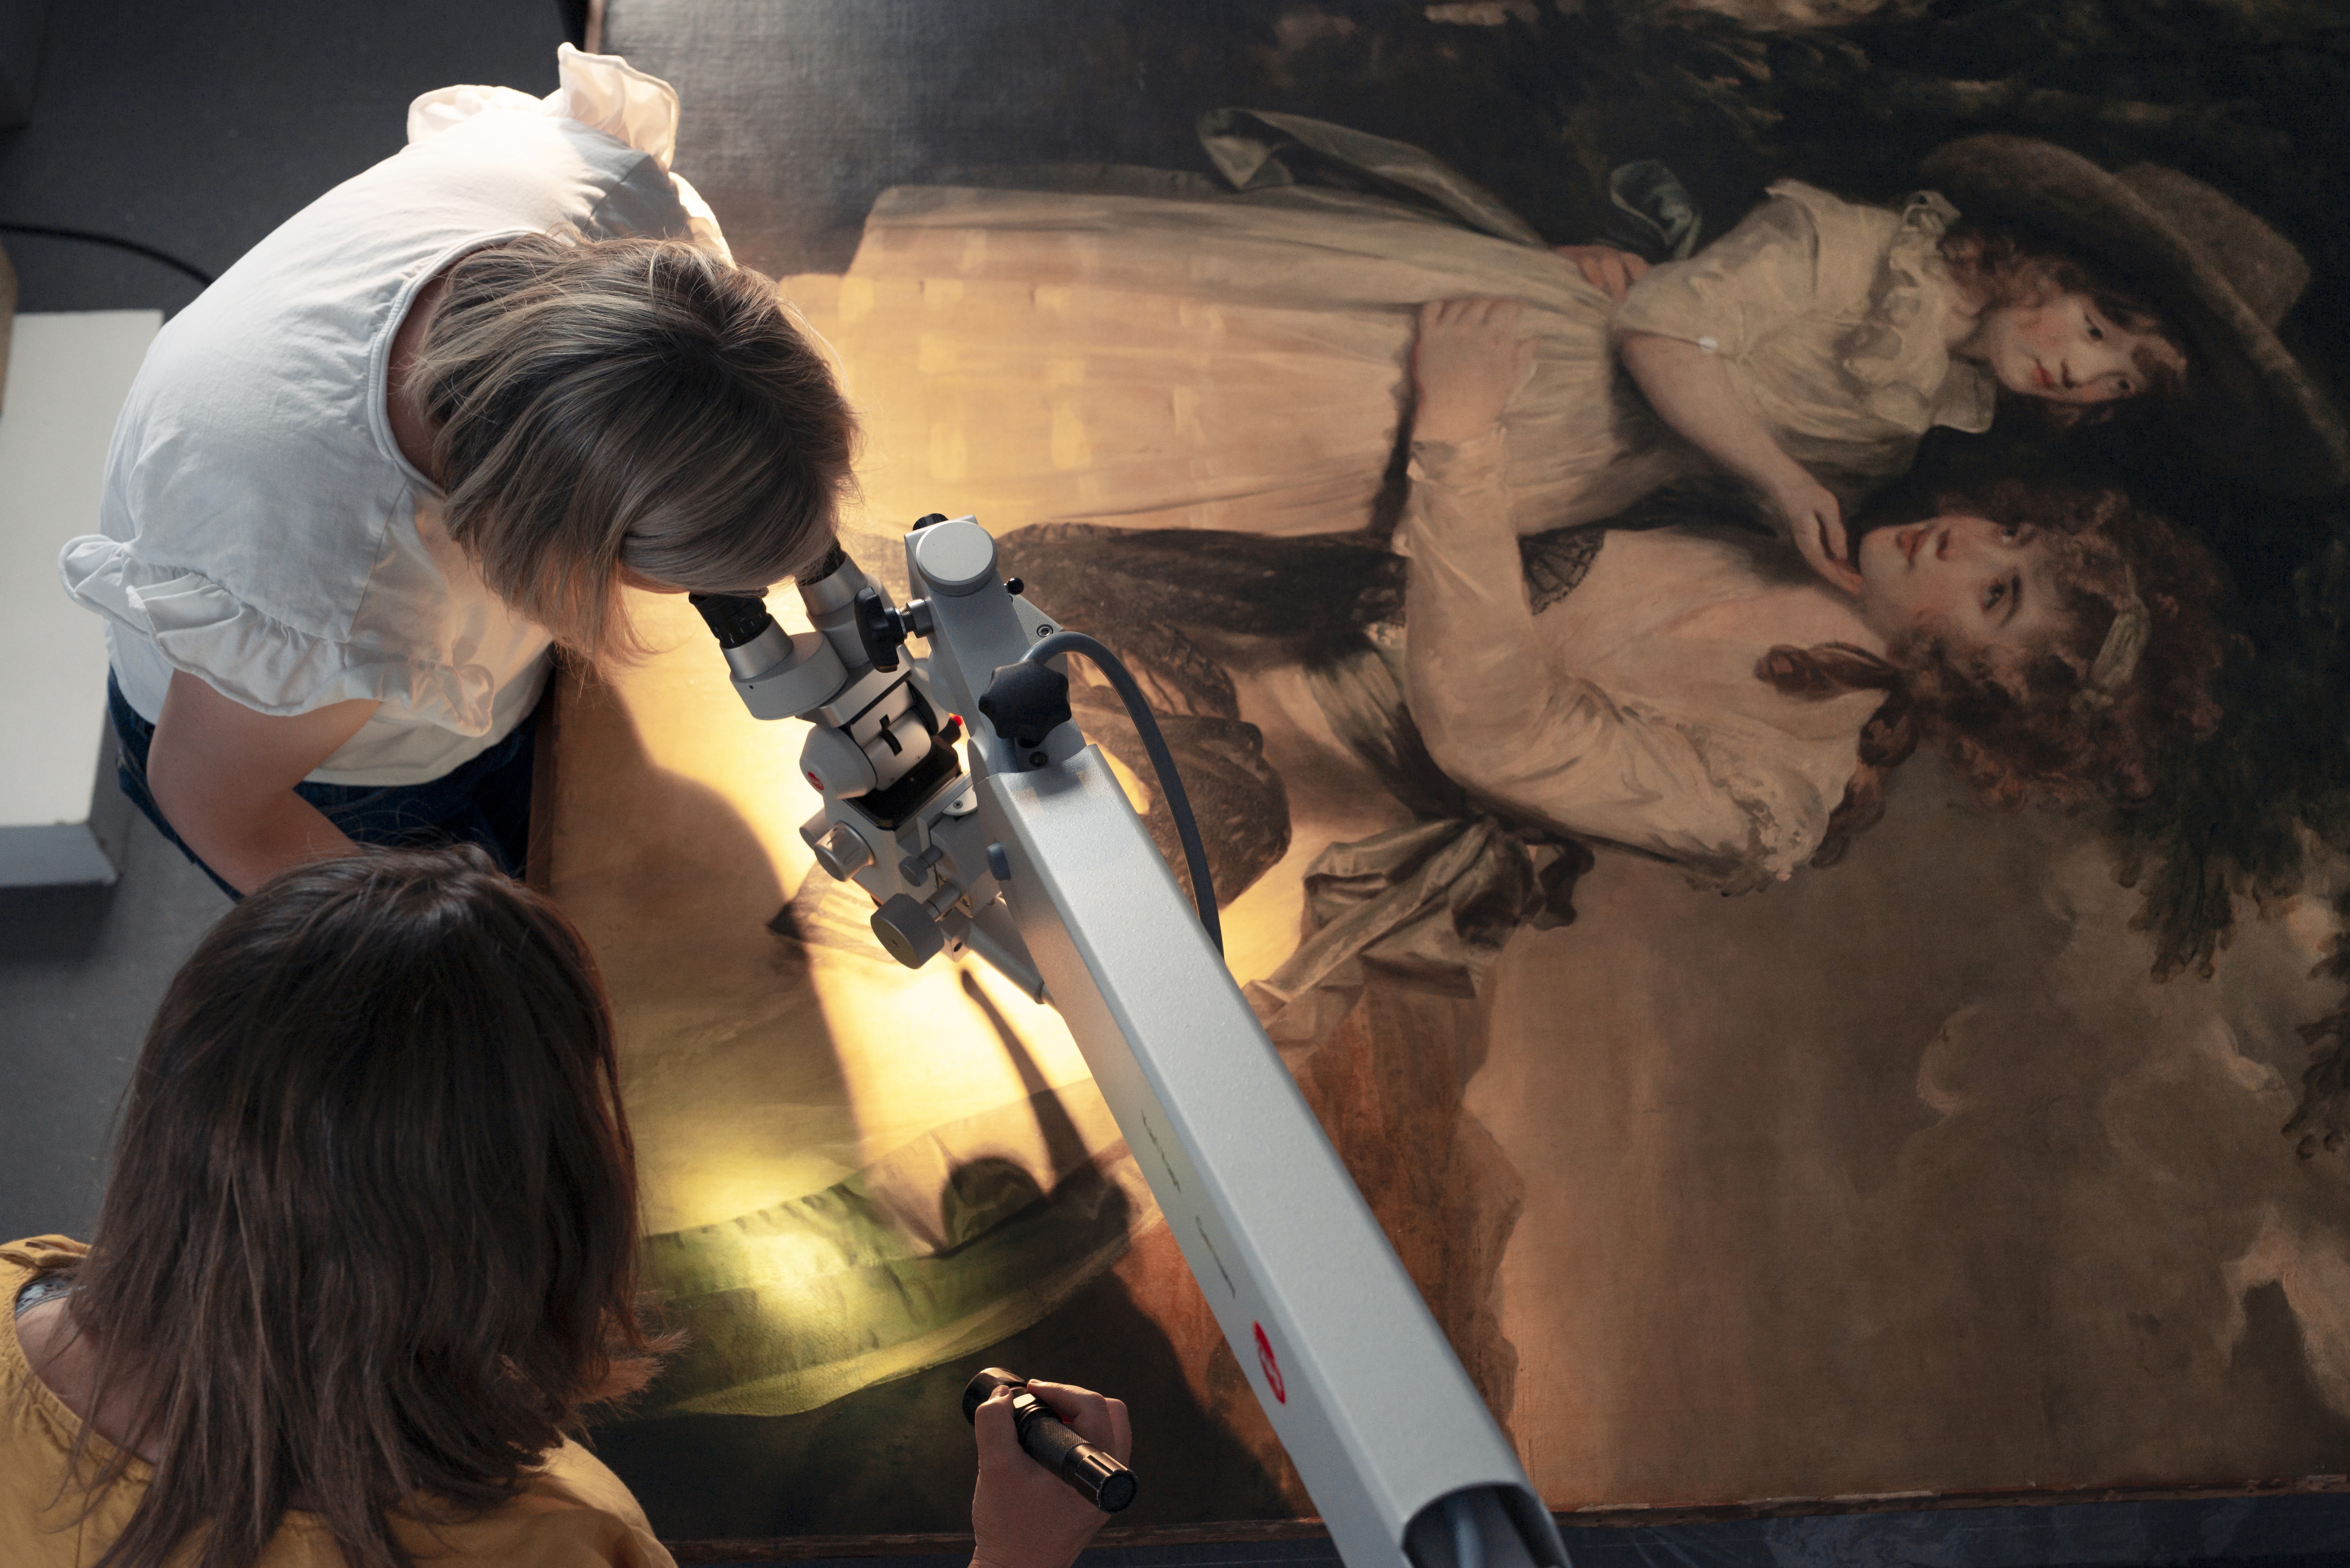 Image: Using microscopy to examine the surface of paintings